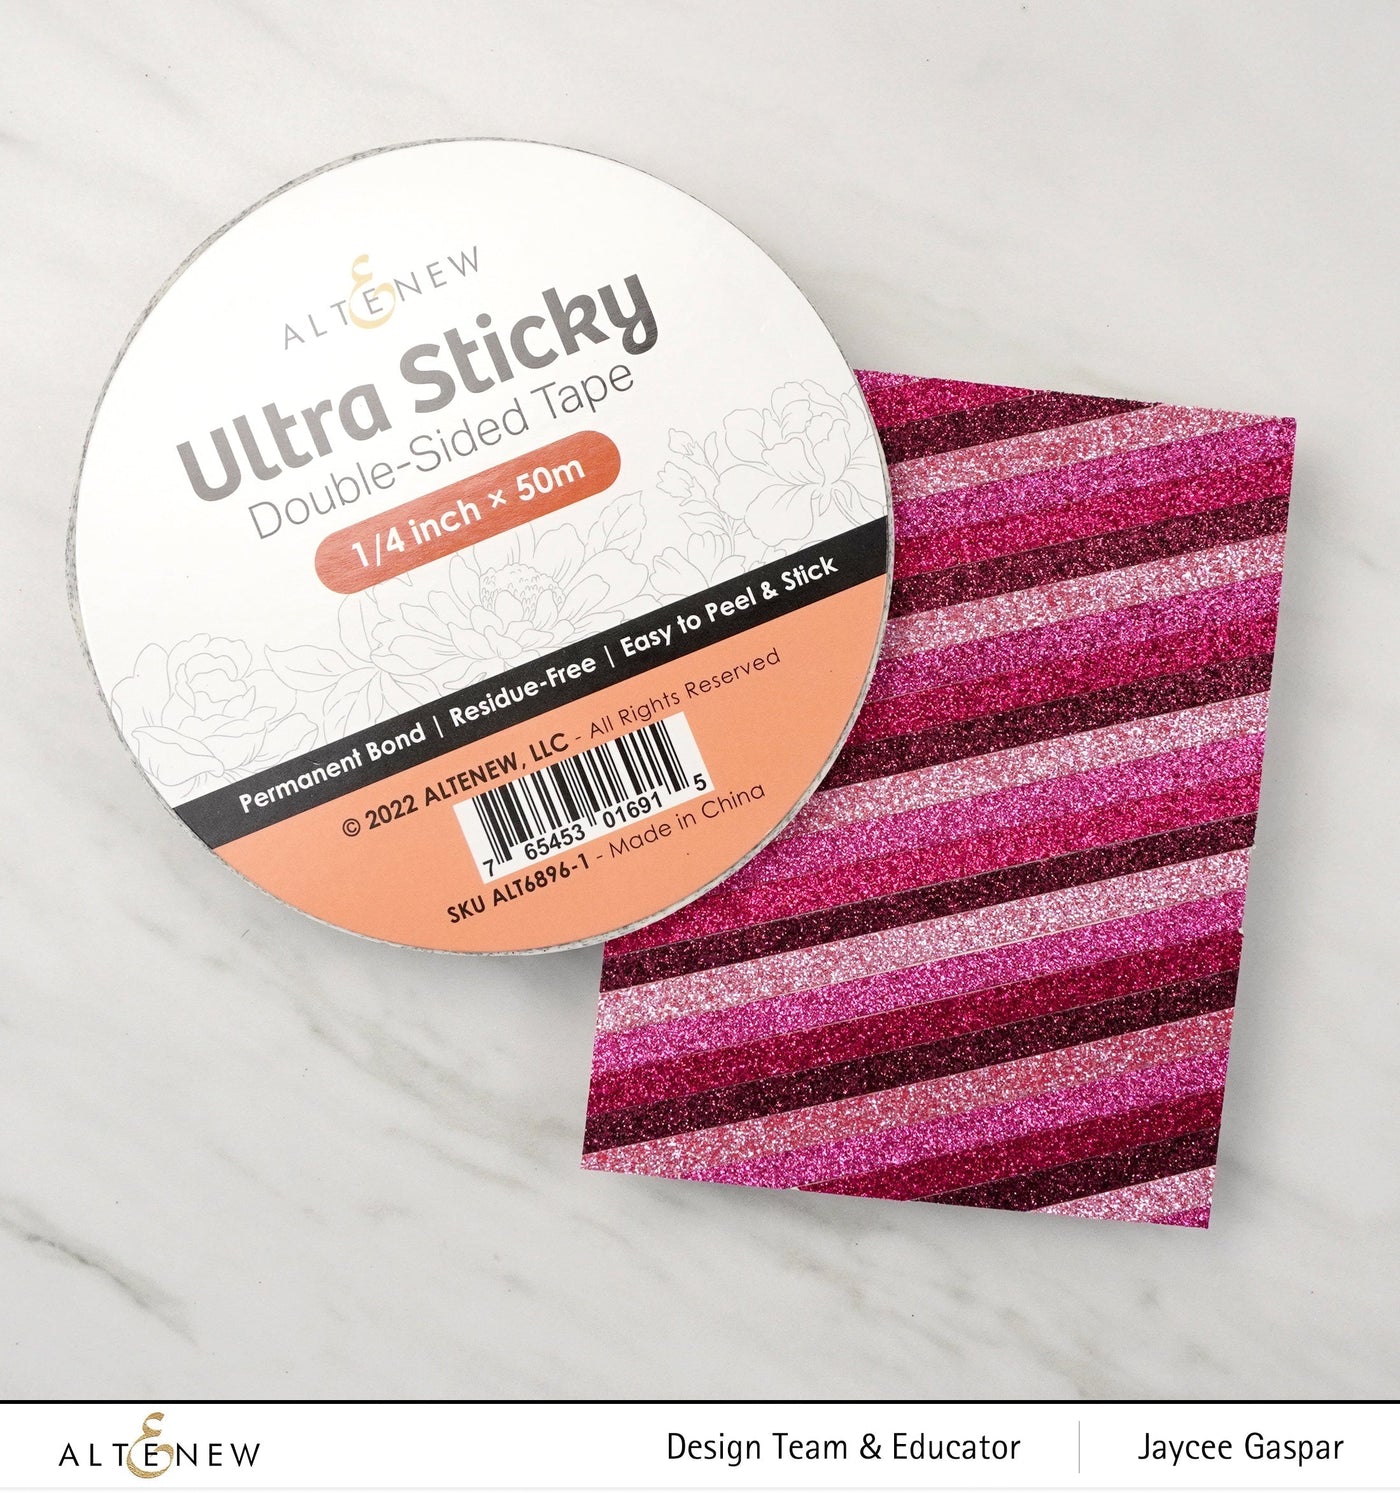 Adhesives Ultra Sticky Tape Complete Bundle